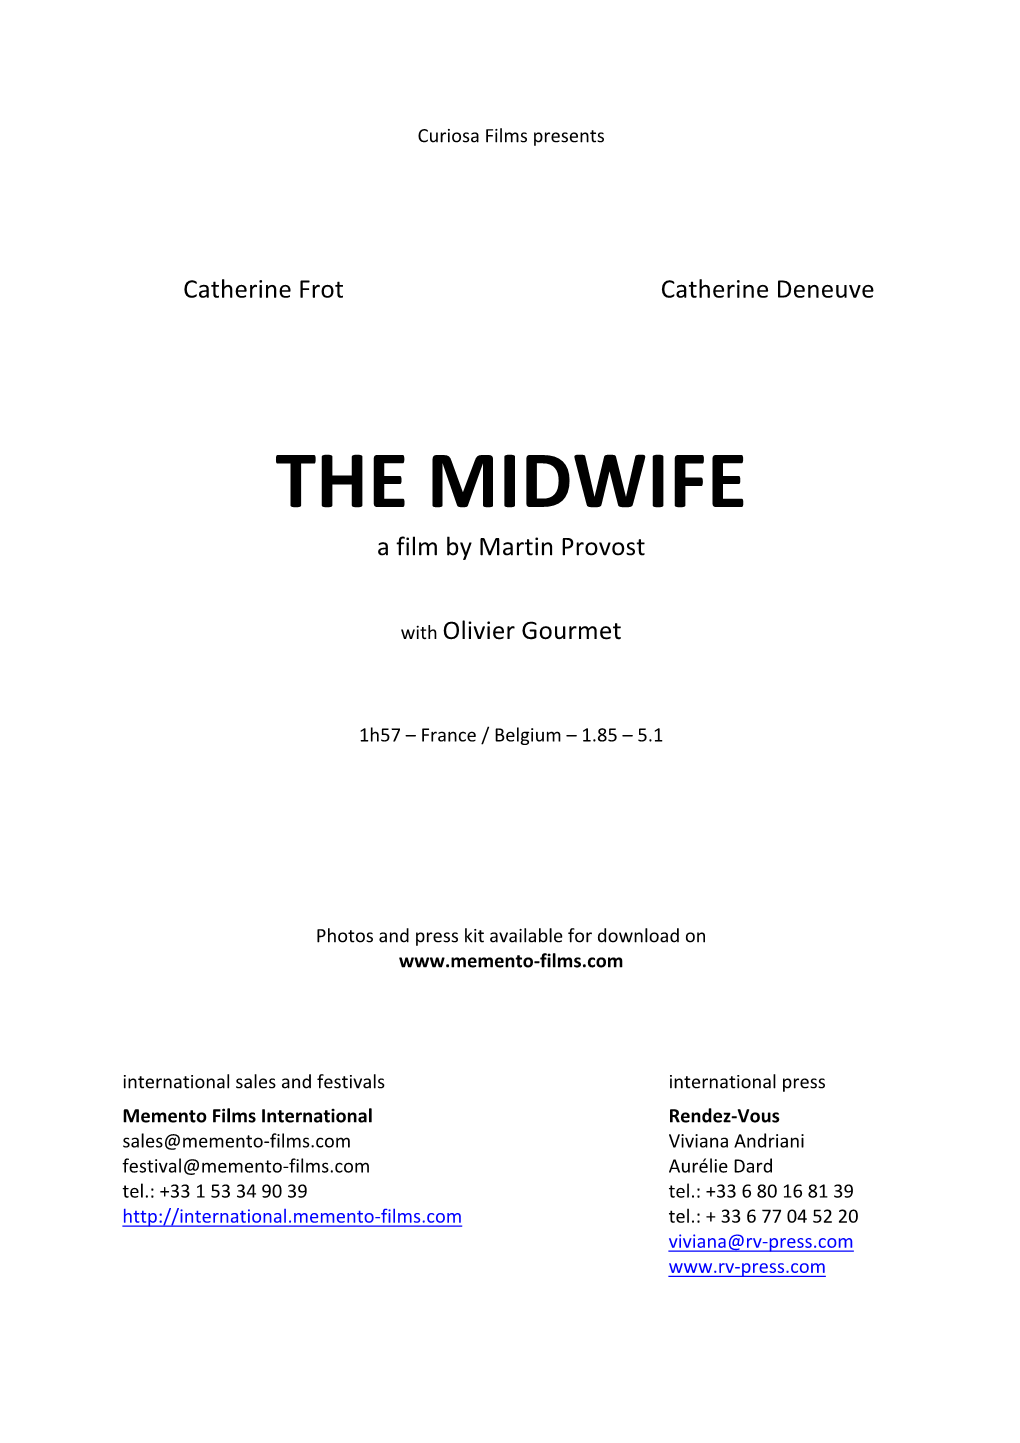 THE MIDWIFE a Film by Martin Provost